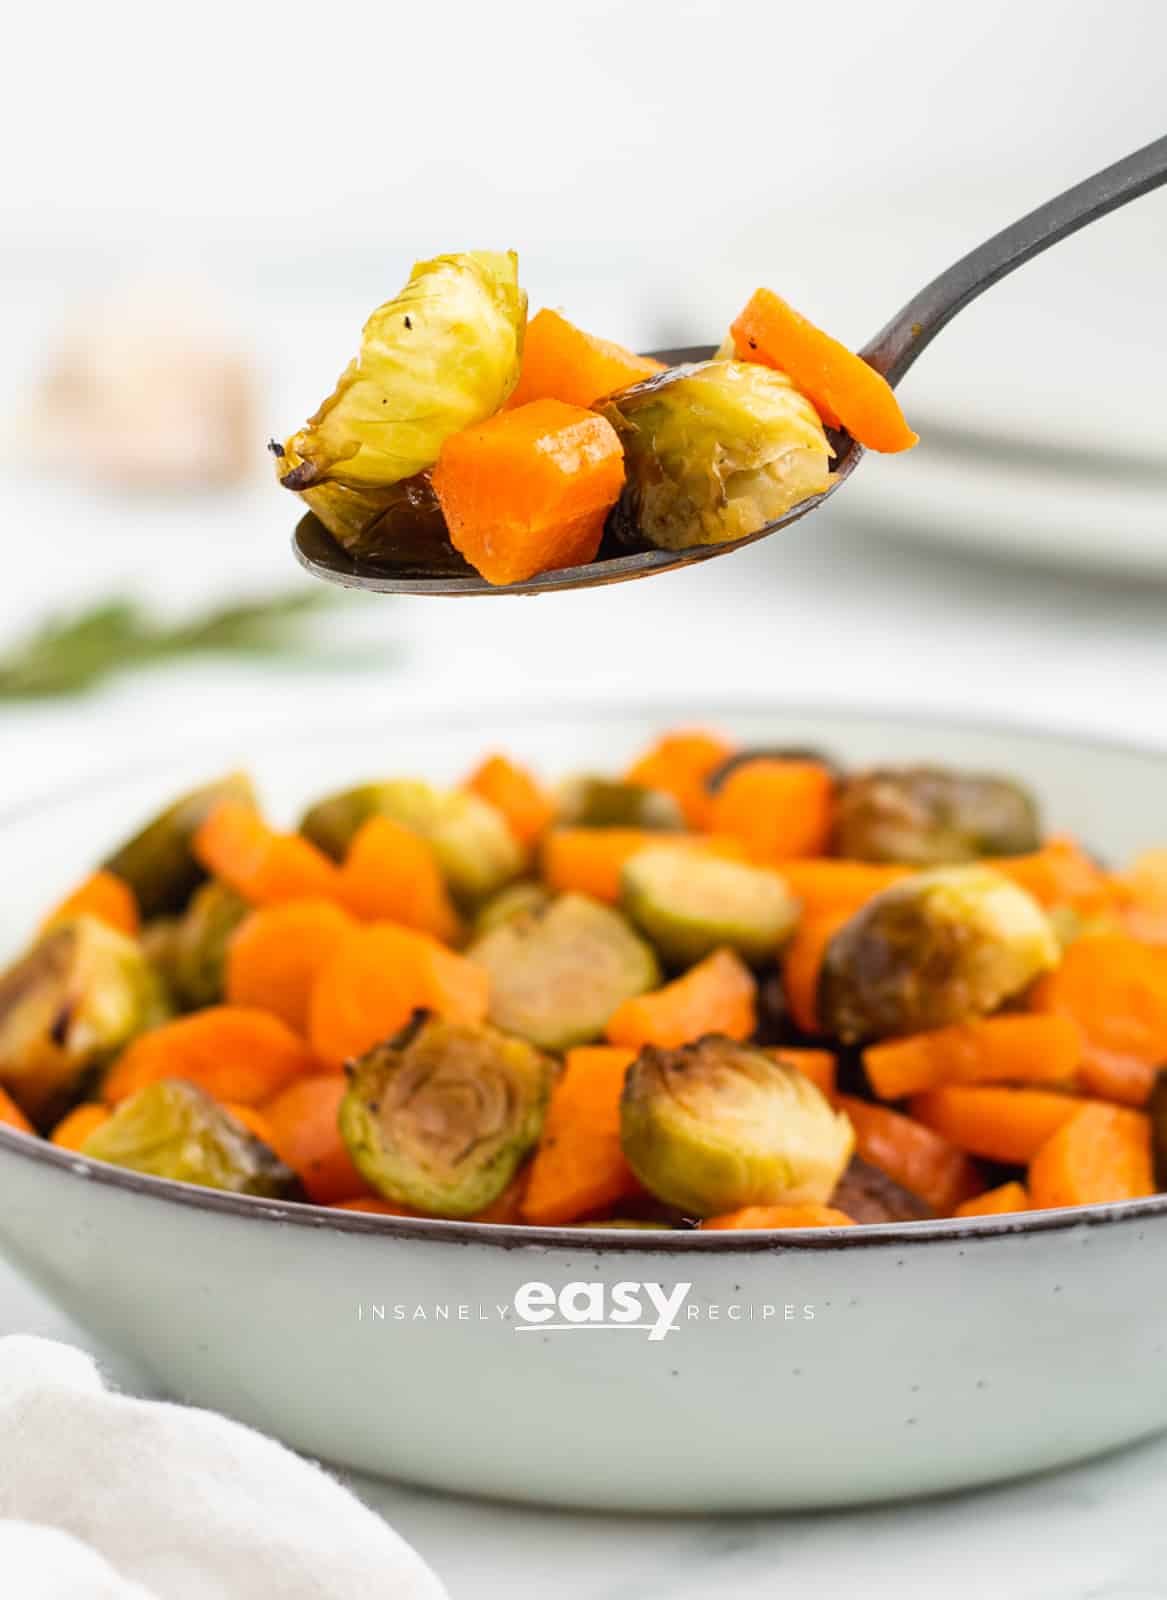 roasted brussel sprouts in a white bowl with a silver spoon above the bowl full of carrots and brussels